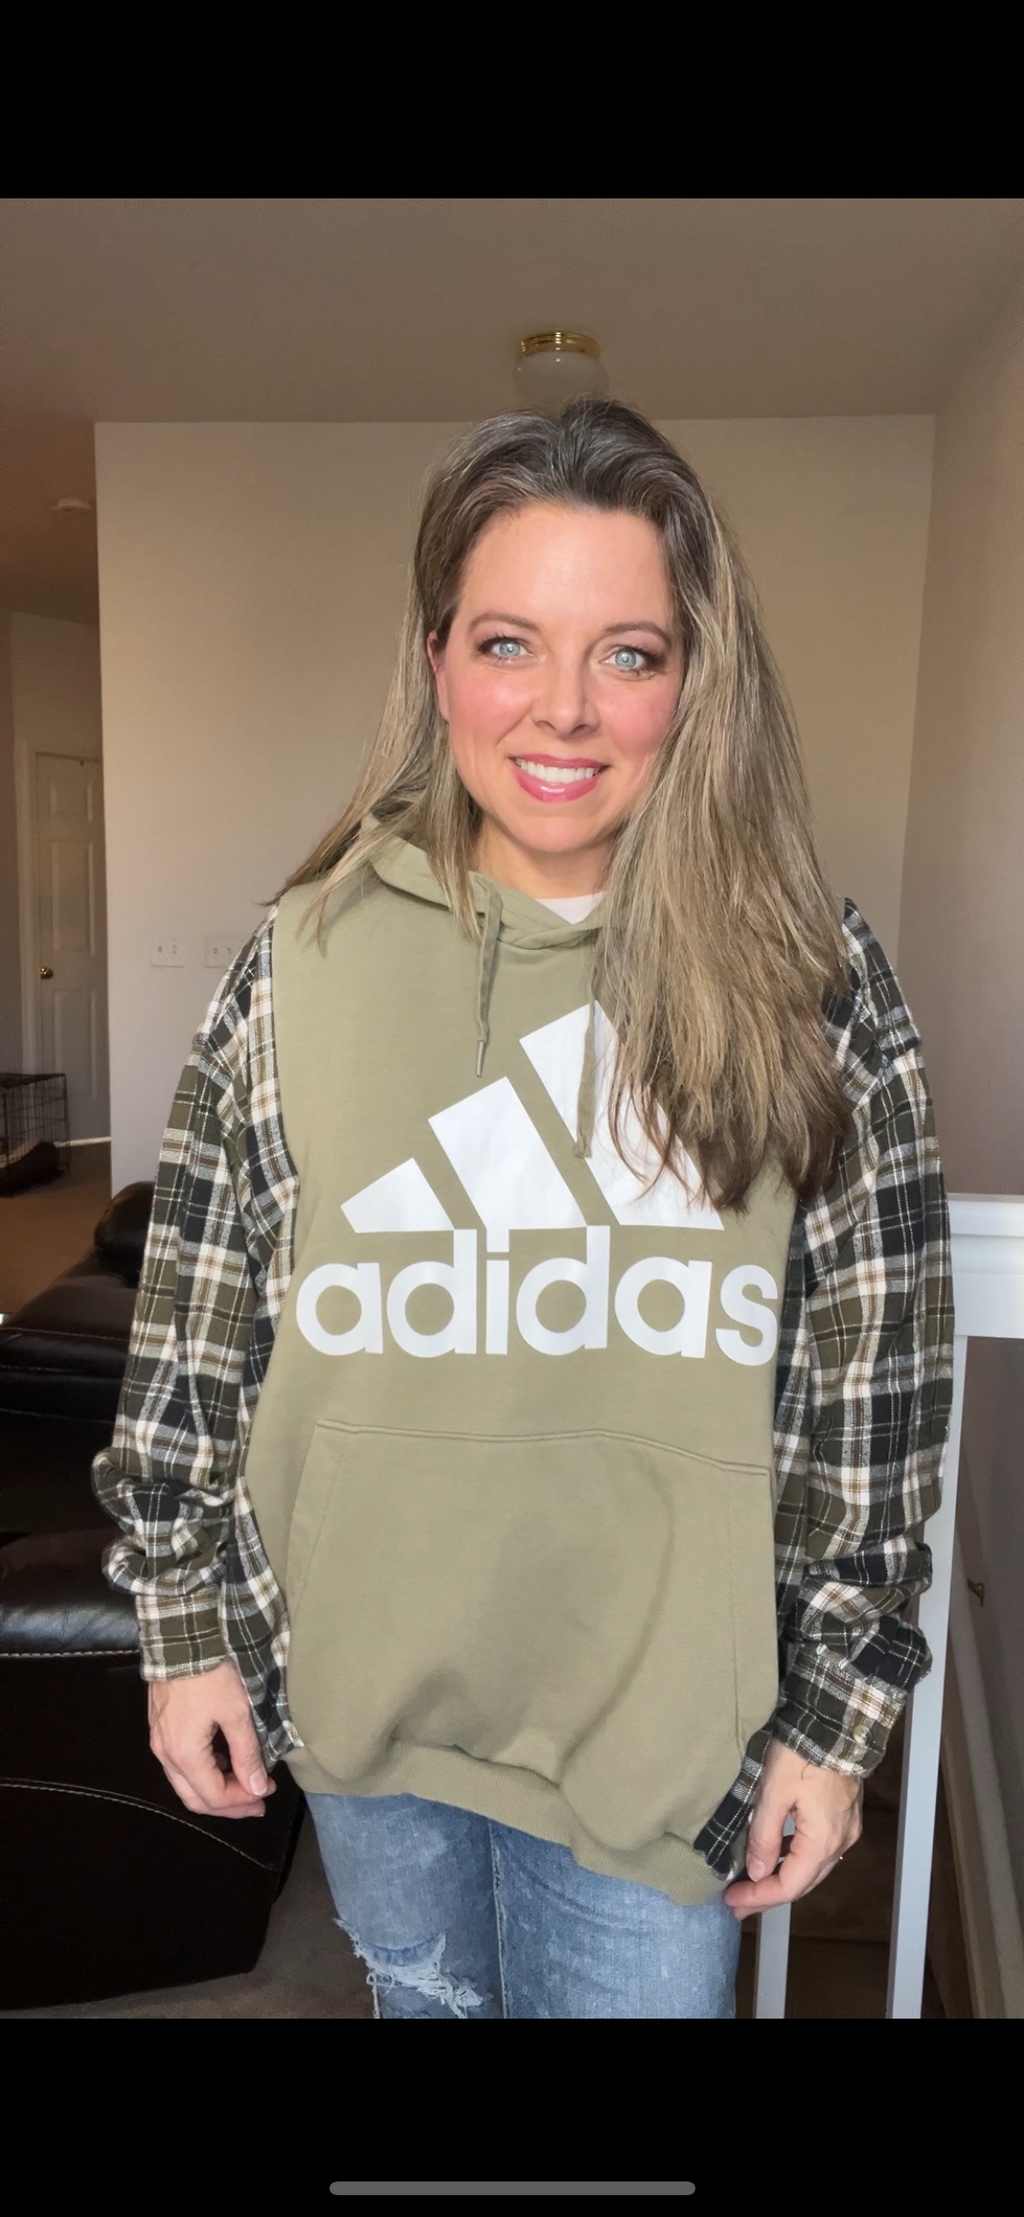 Upcycled Tan Adidas – women’s 1X – midweight sweatshirt with flannel sleeves￼